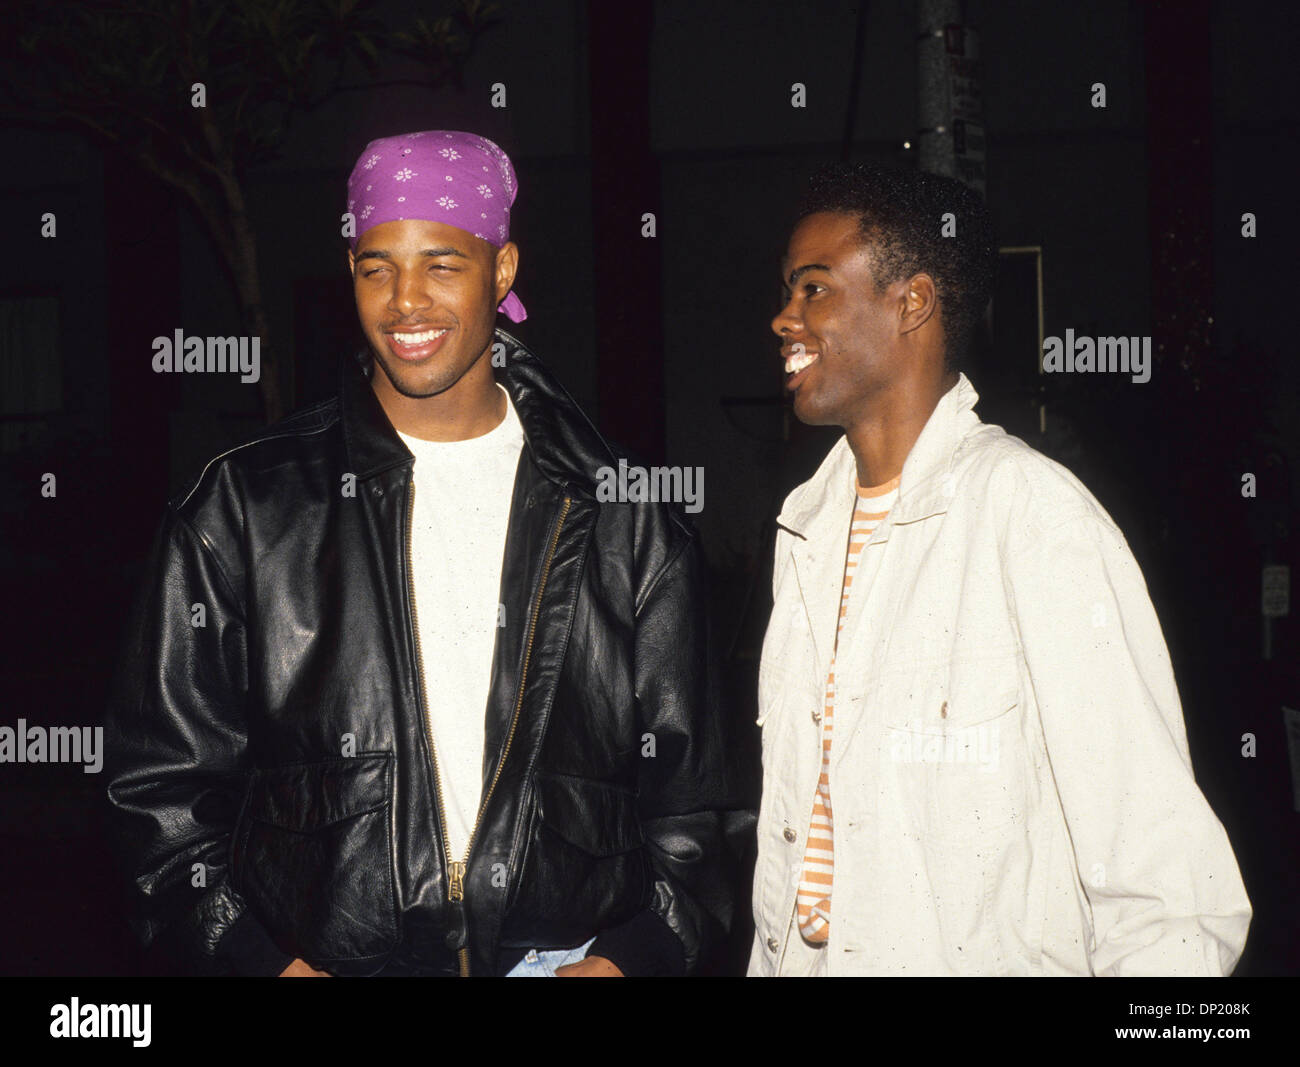 May 11, 2006; Los Angeles, CA, USA; (Stock Photo - Date Unknown) CHRIS ROCK (born February 7, 1965 in Andrews, South Carolina) is an American stand-up comedian and actor. He grew up in Bed-Stuy in Brooklyn, New York.  Pictured: Rock with Shawn Wayans. Mandatory Credit: Photo by Kathy Hutchins/ZUMA Press. (©) Copyright 2006 by Kathy Hutchins Stock Photo